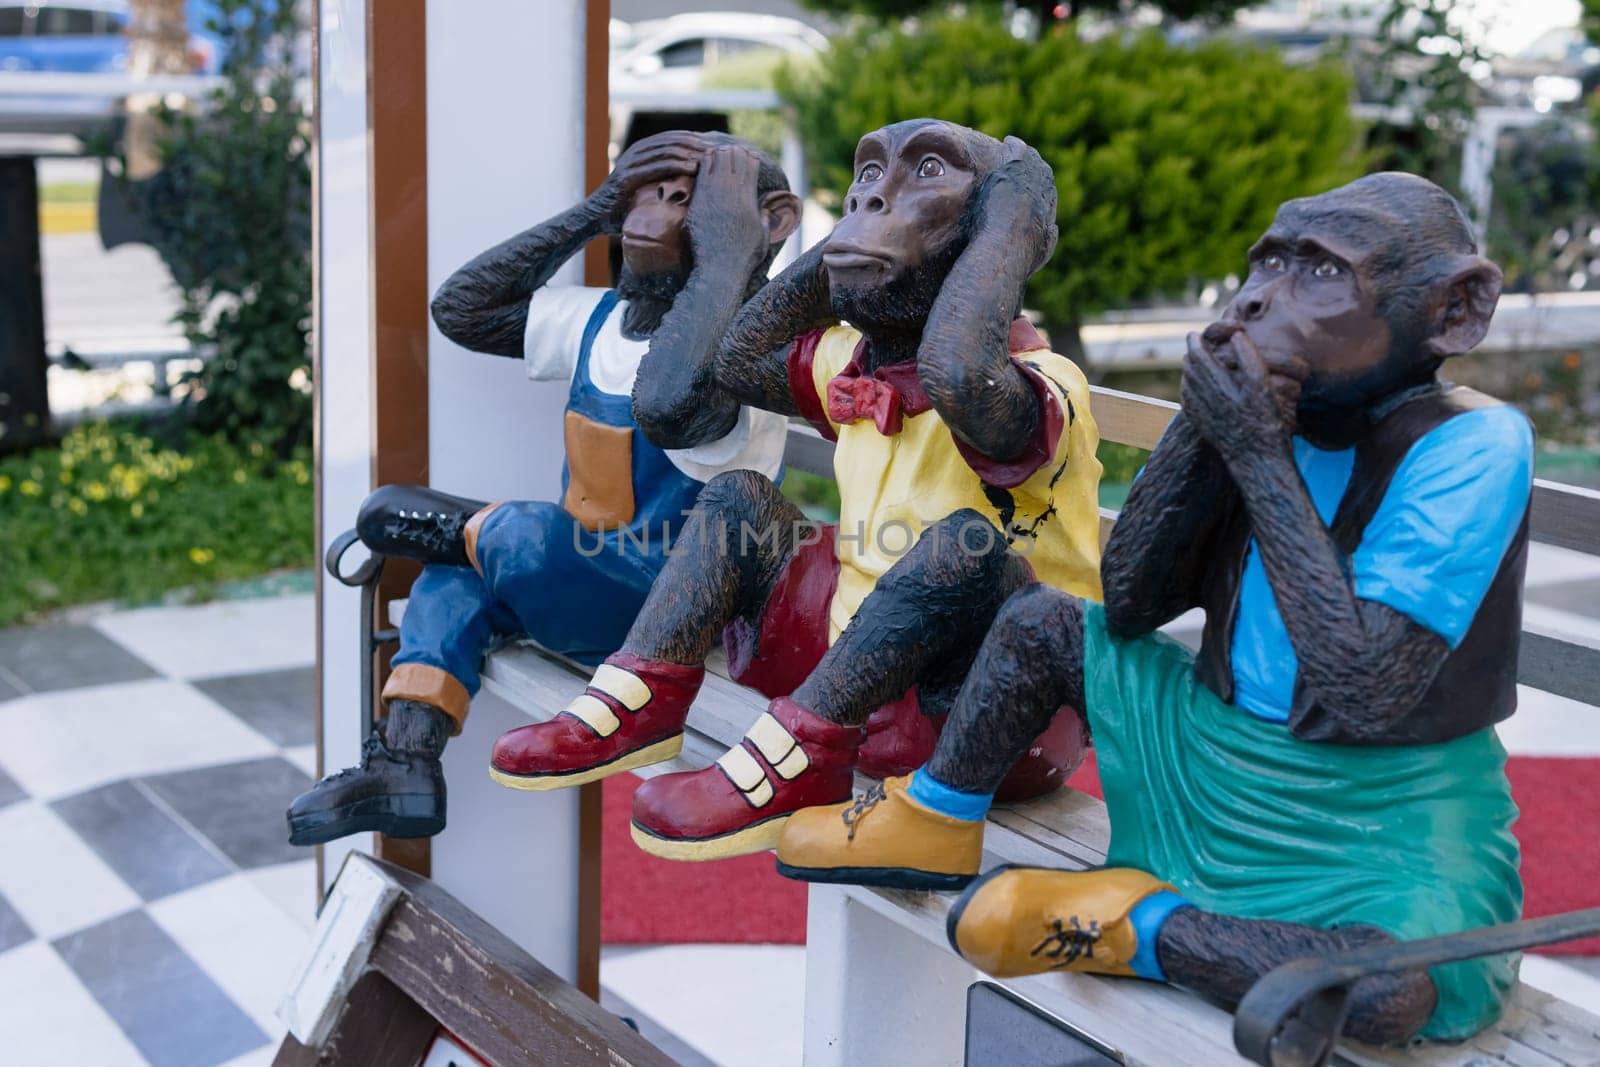 figurines of three monkeys, creative figurines from the designer. High quality photo